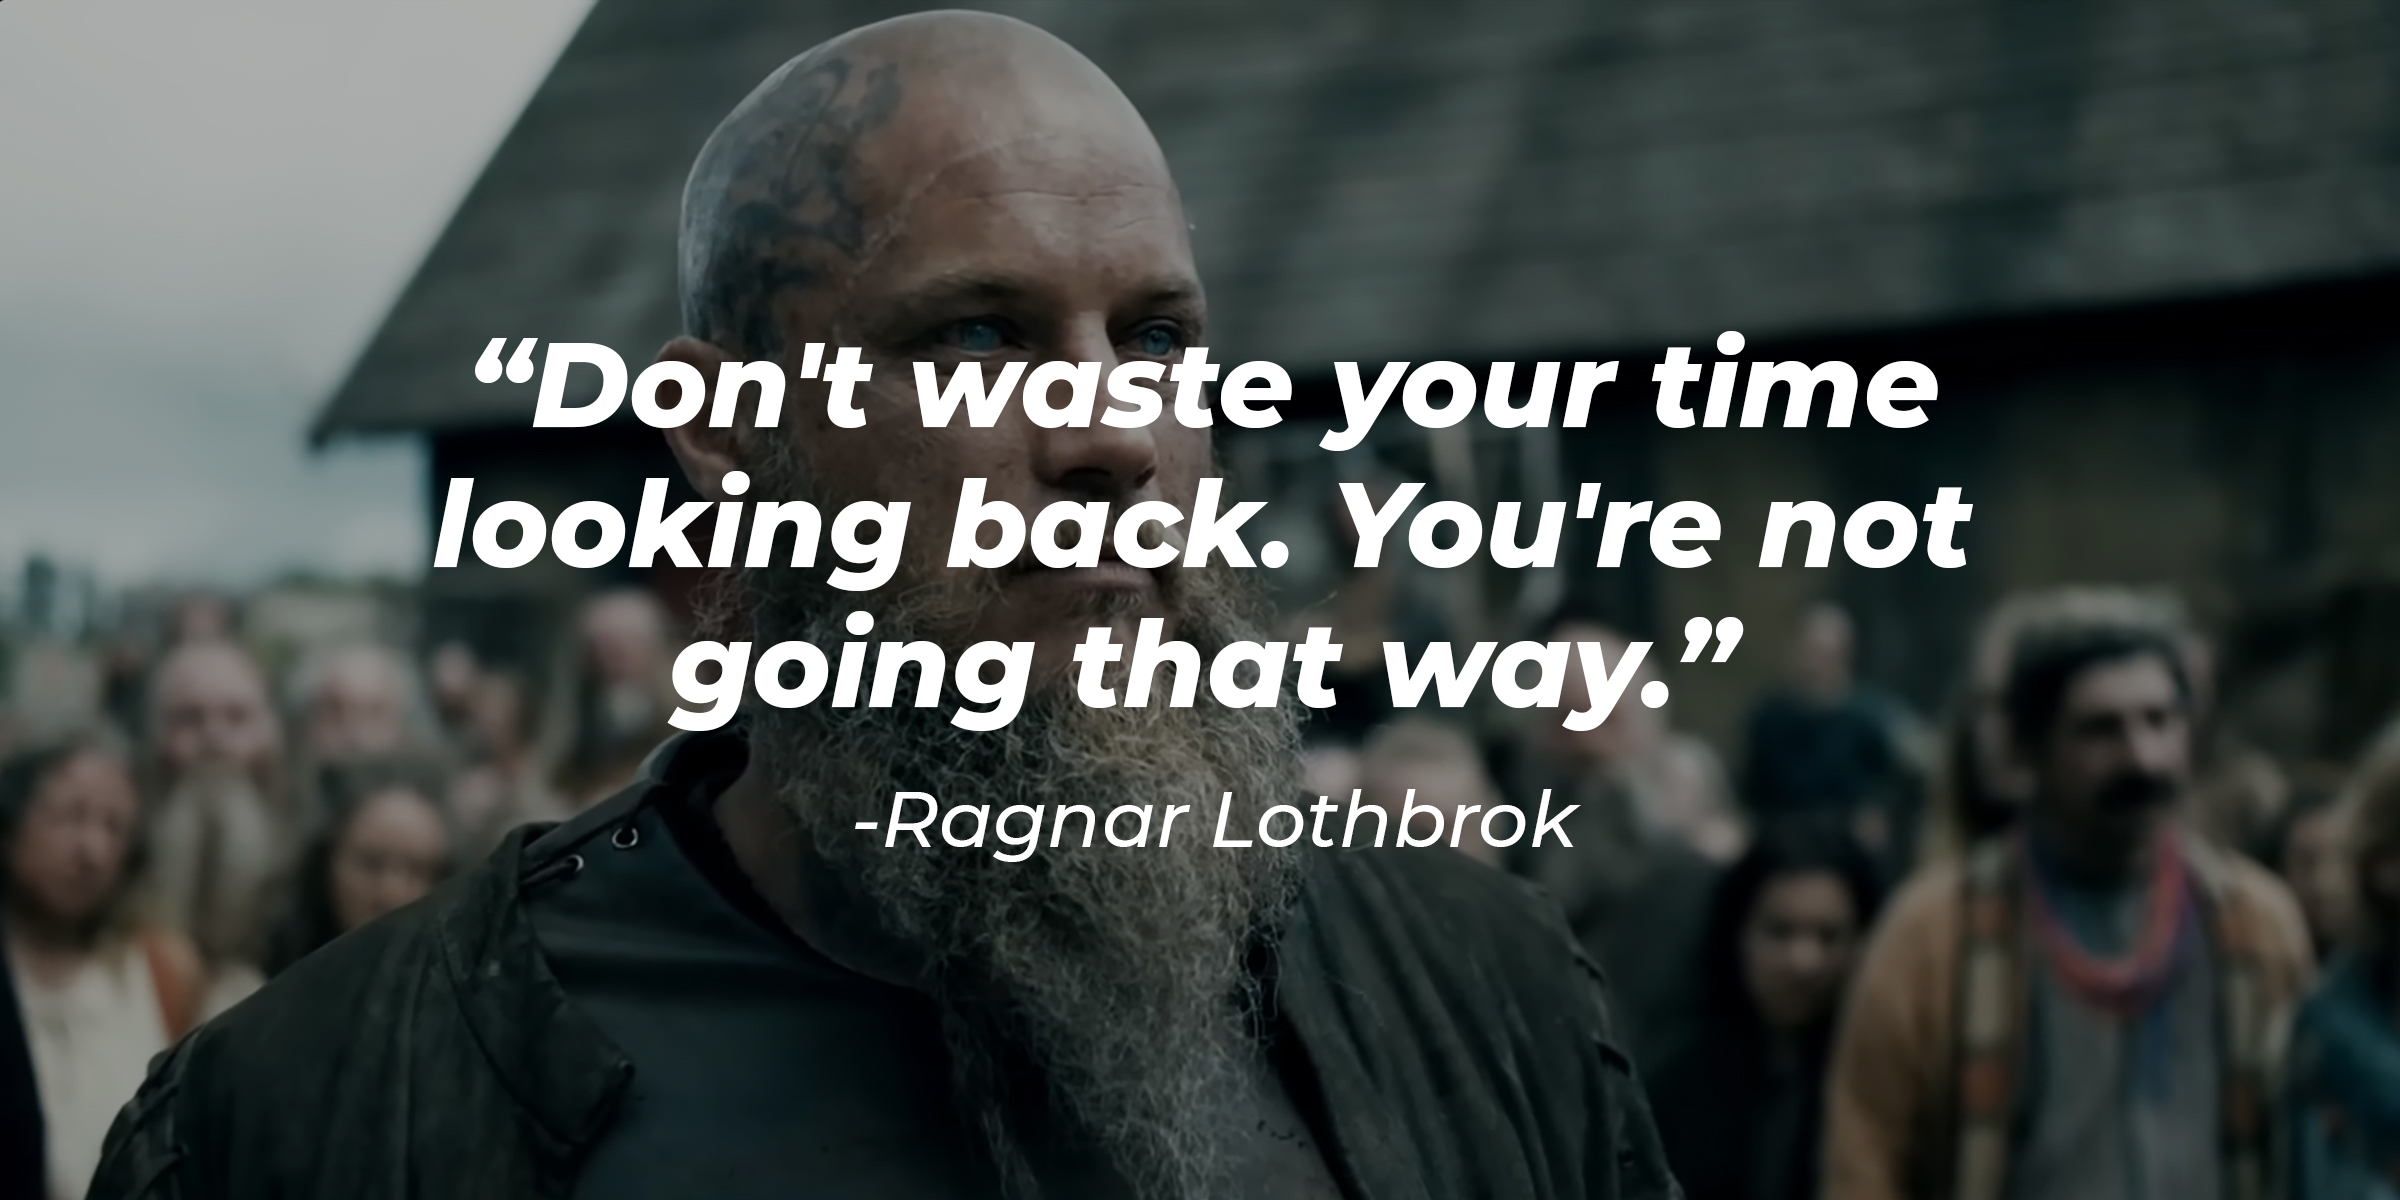 Ragnar Lothbrok's quote: "Don't waste your time looking back. You're not going that way." | Source: YouTube/Amazon Prime Video UK